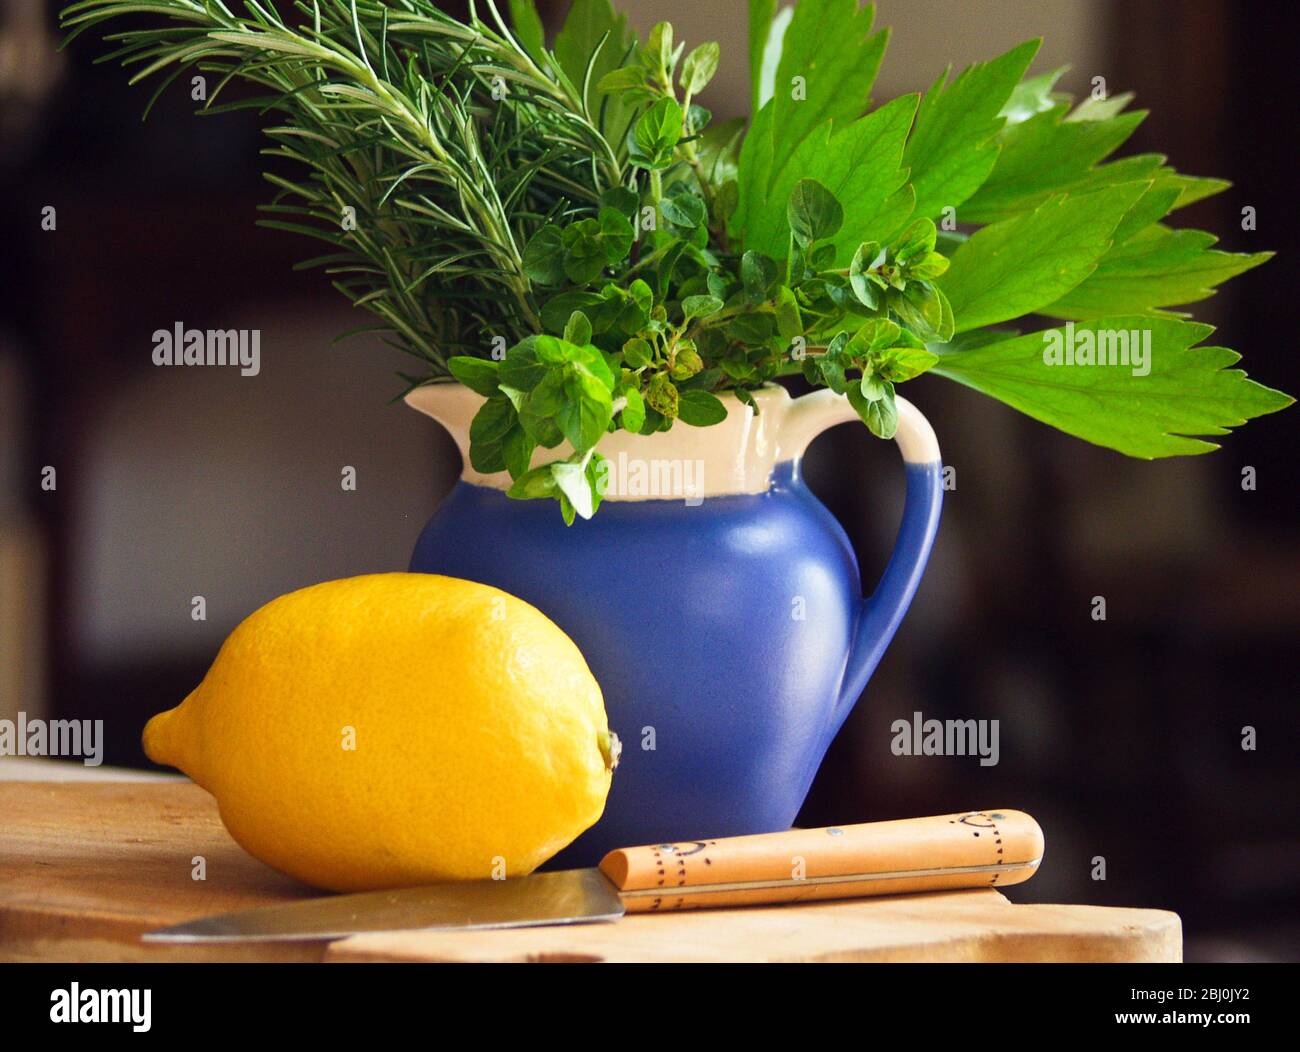 Lemon on chopping board with knife and bunch of mixed garden herbs in blue jug against dark background - Stock Photo